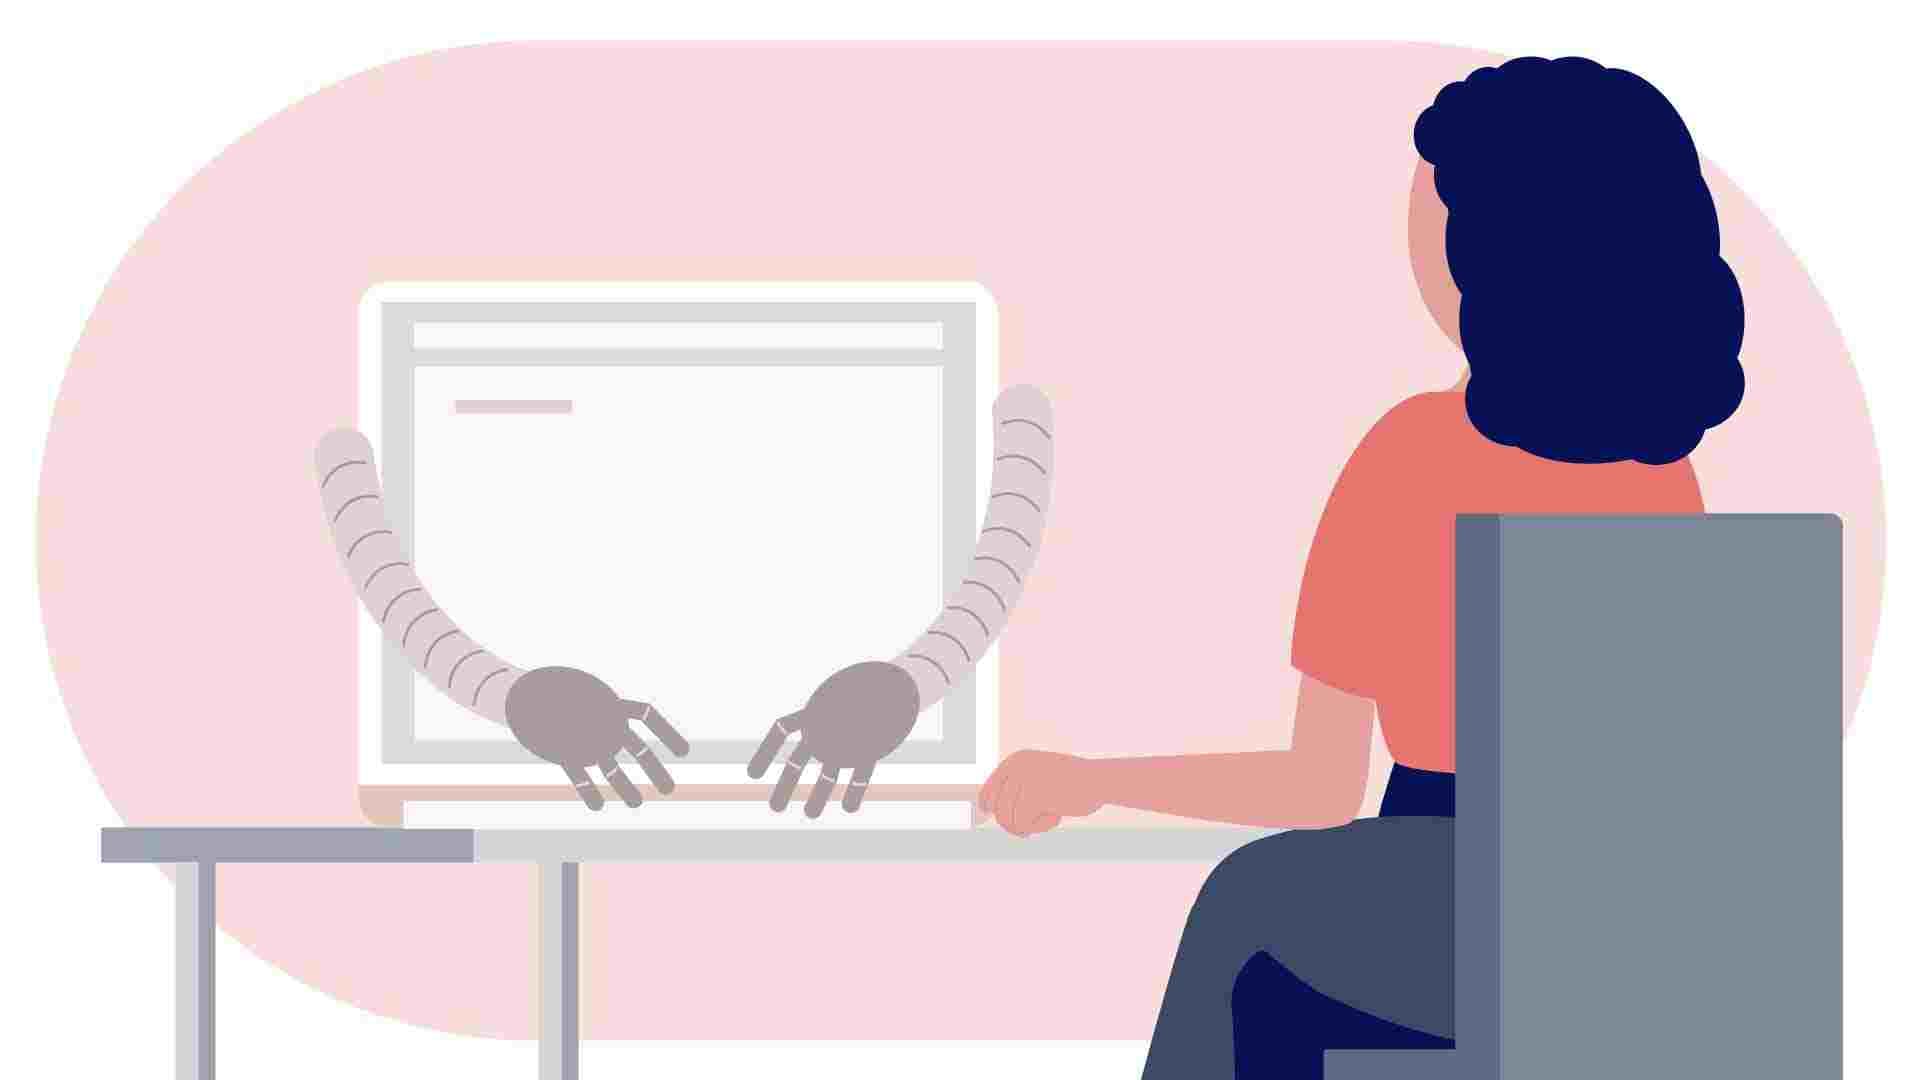 hands coming out of computer and typing while woman observes